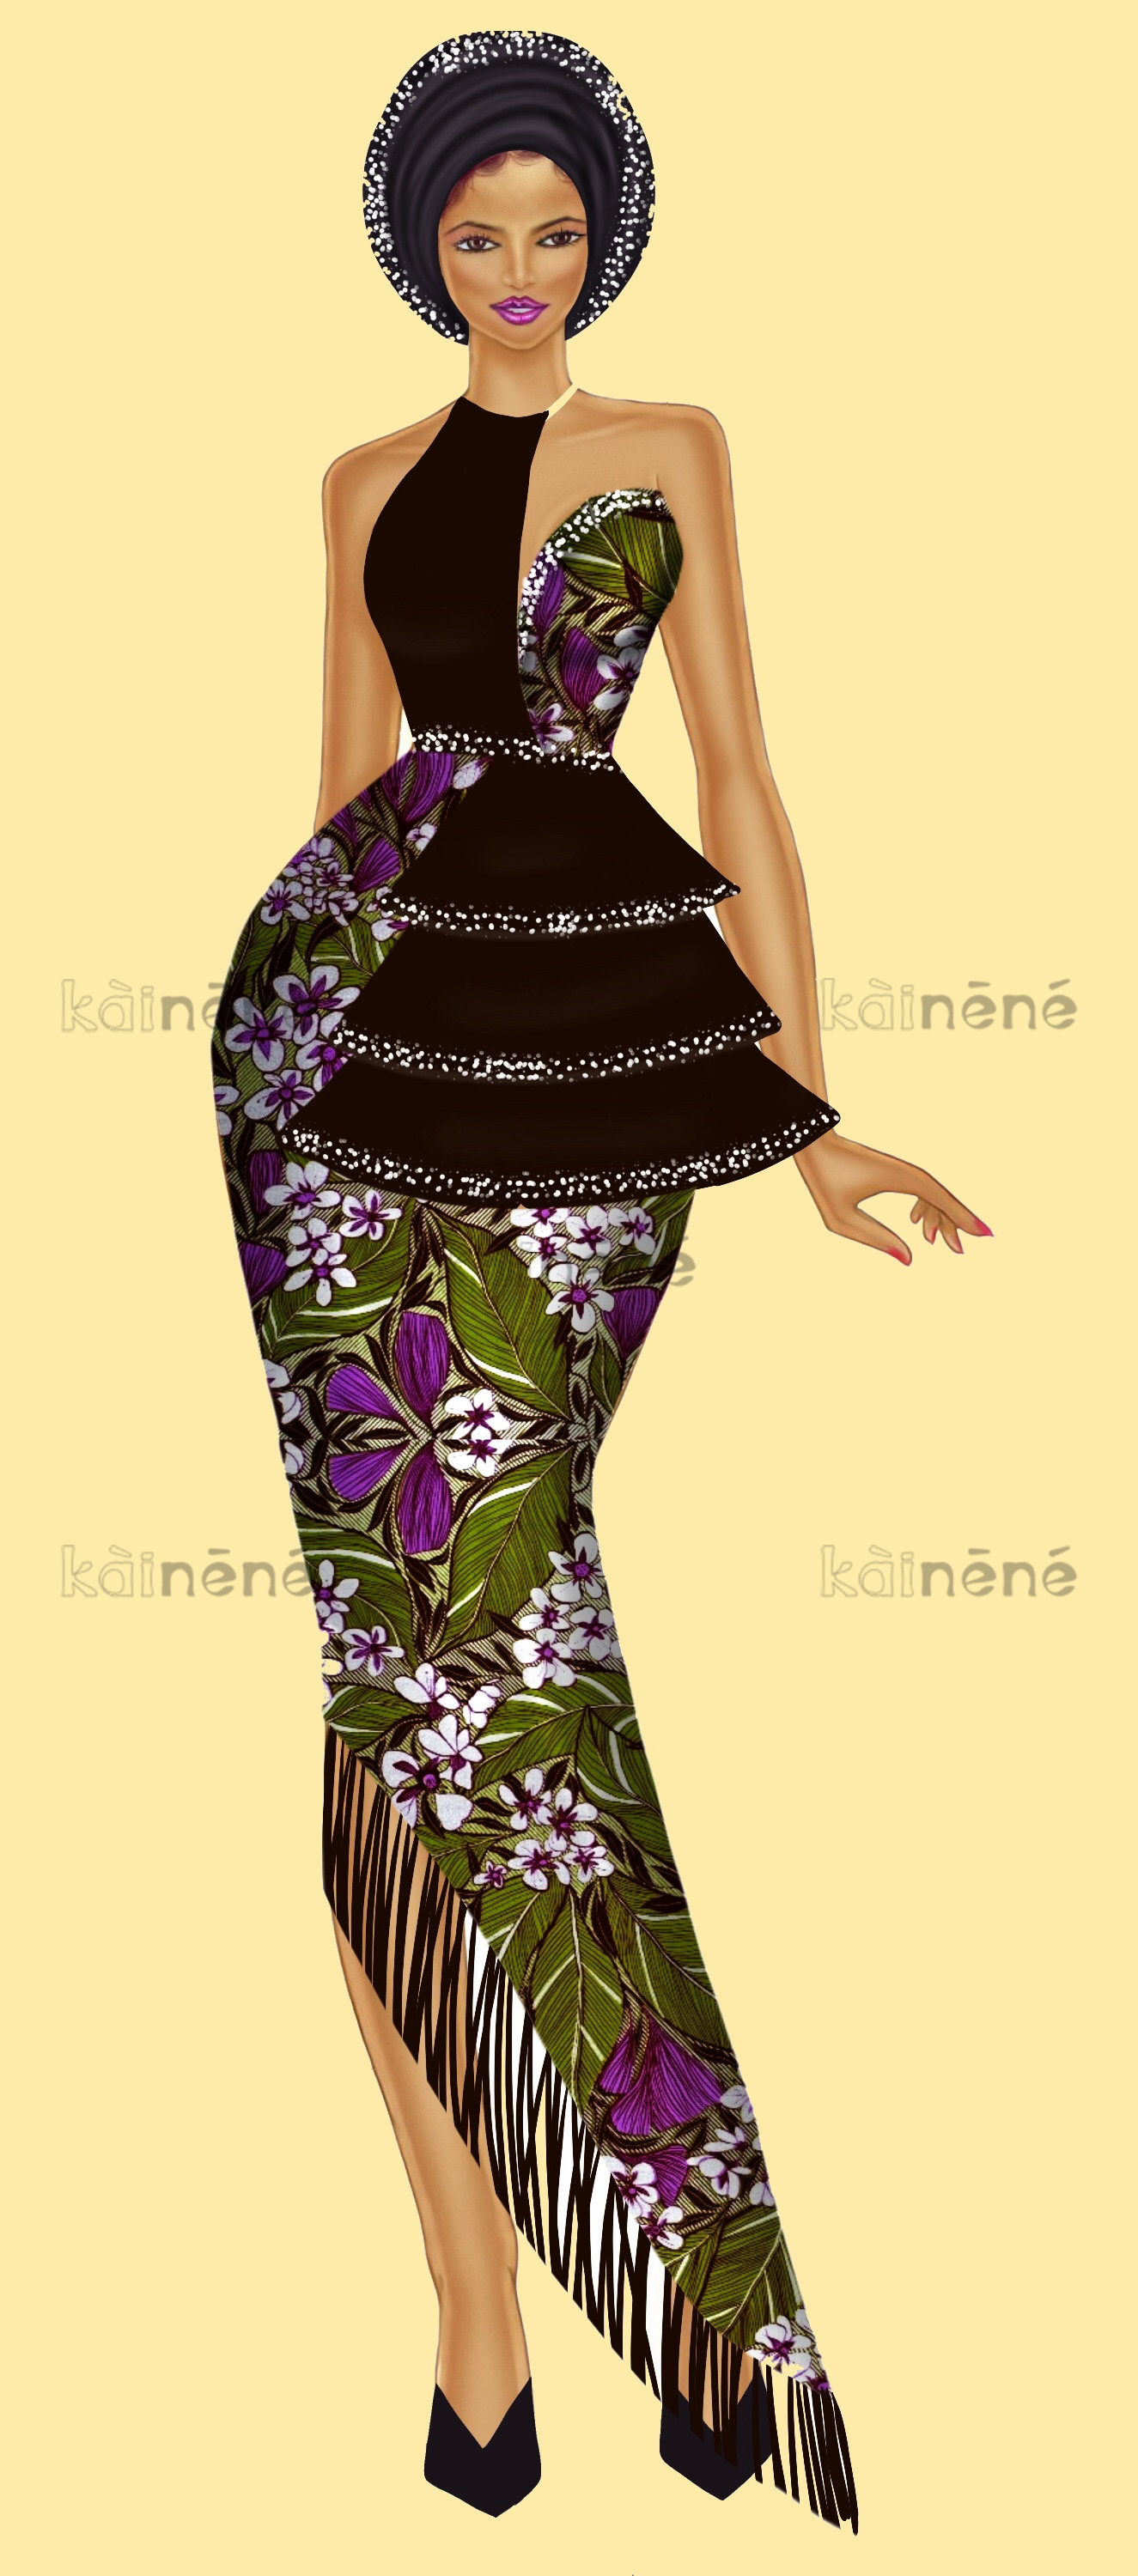 Kainene | African Fashion illustrations and designs